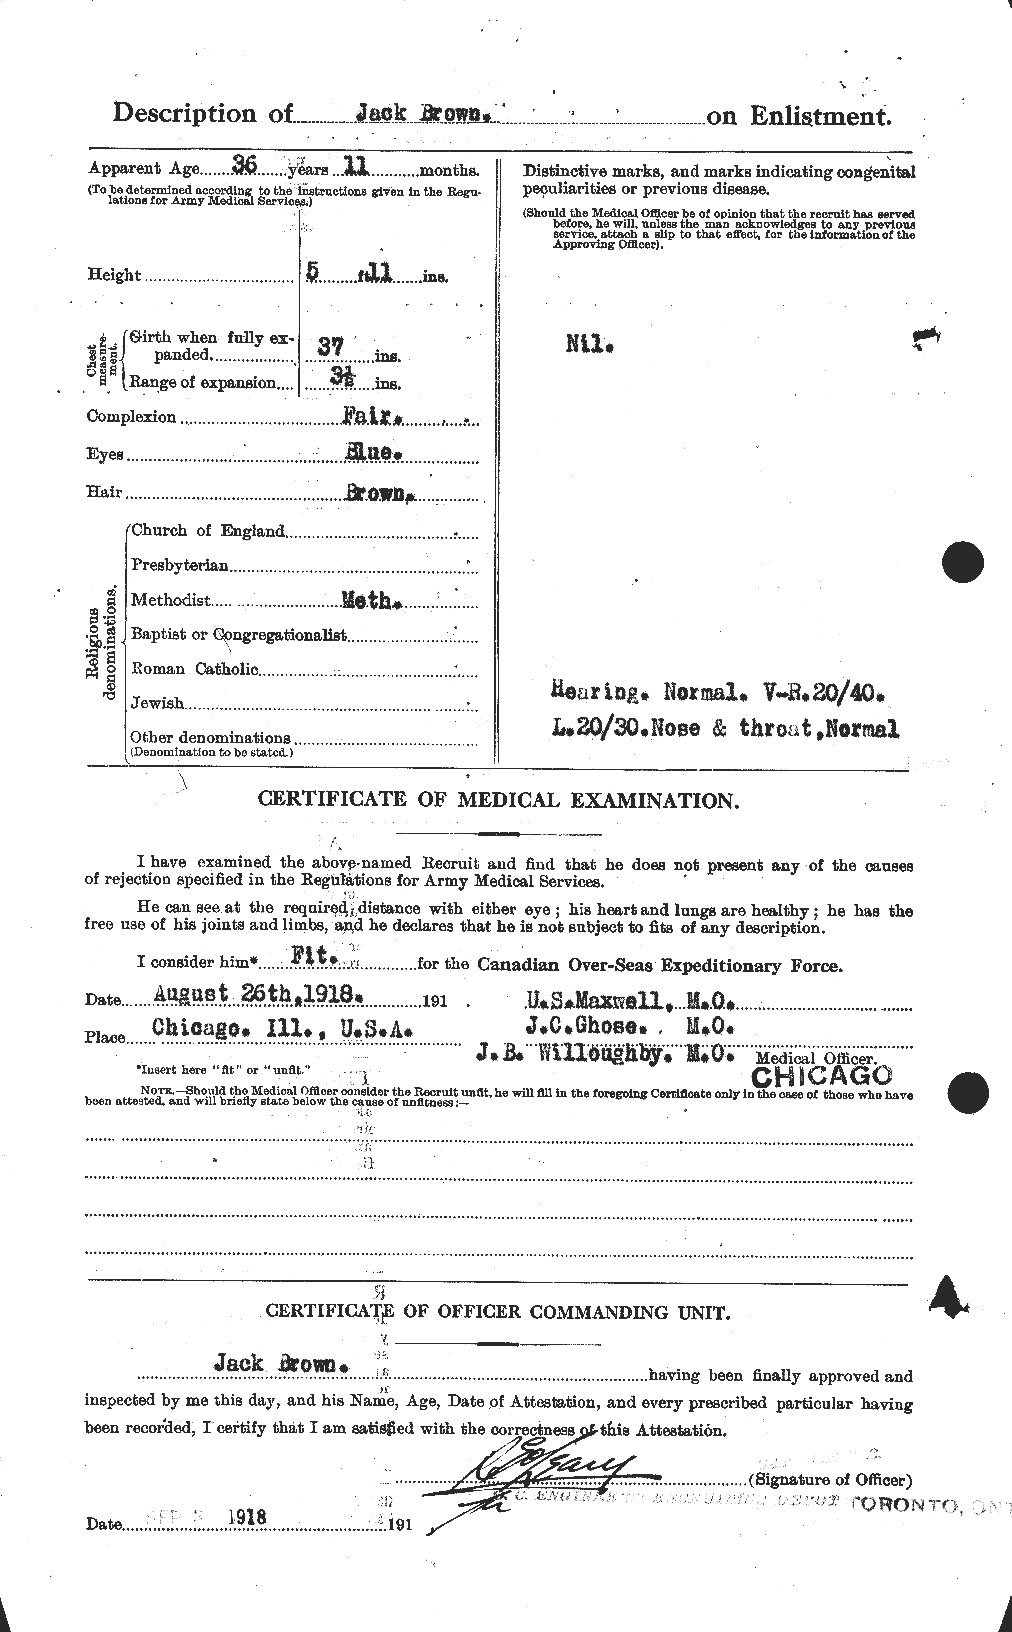 Personnel Records of the First World War - CEF 269716b